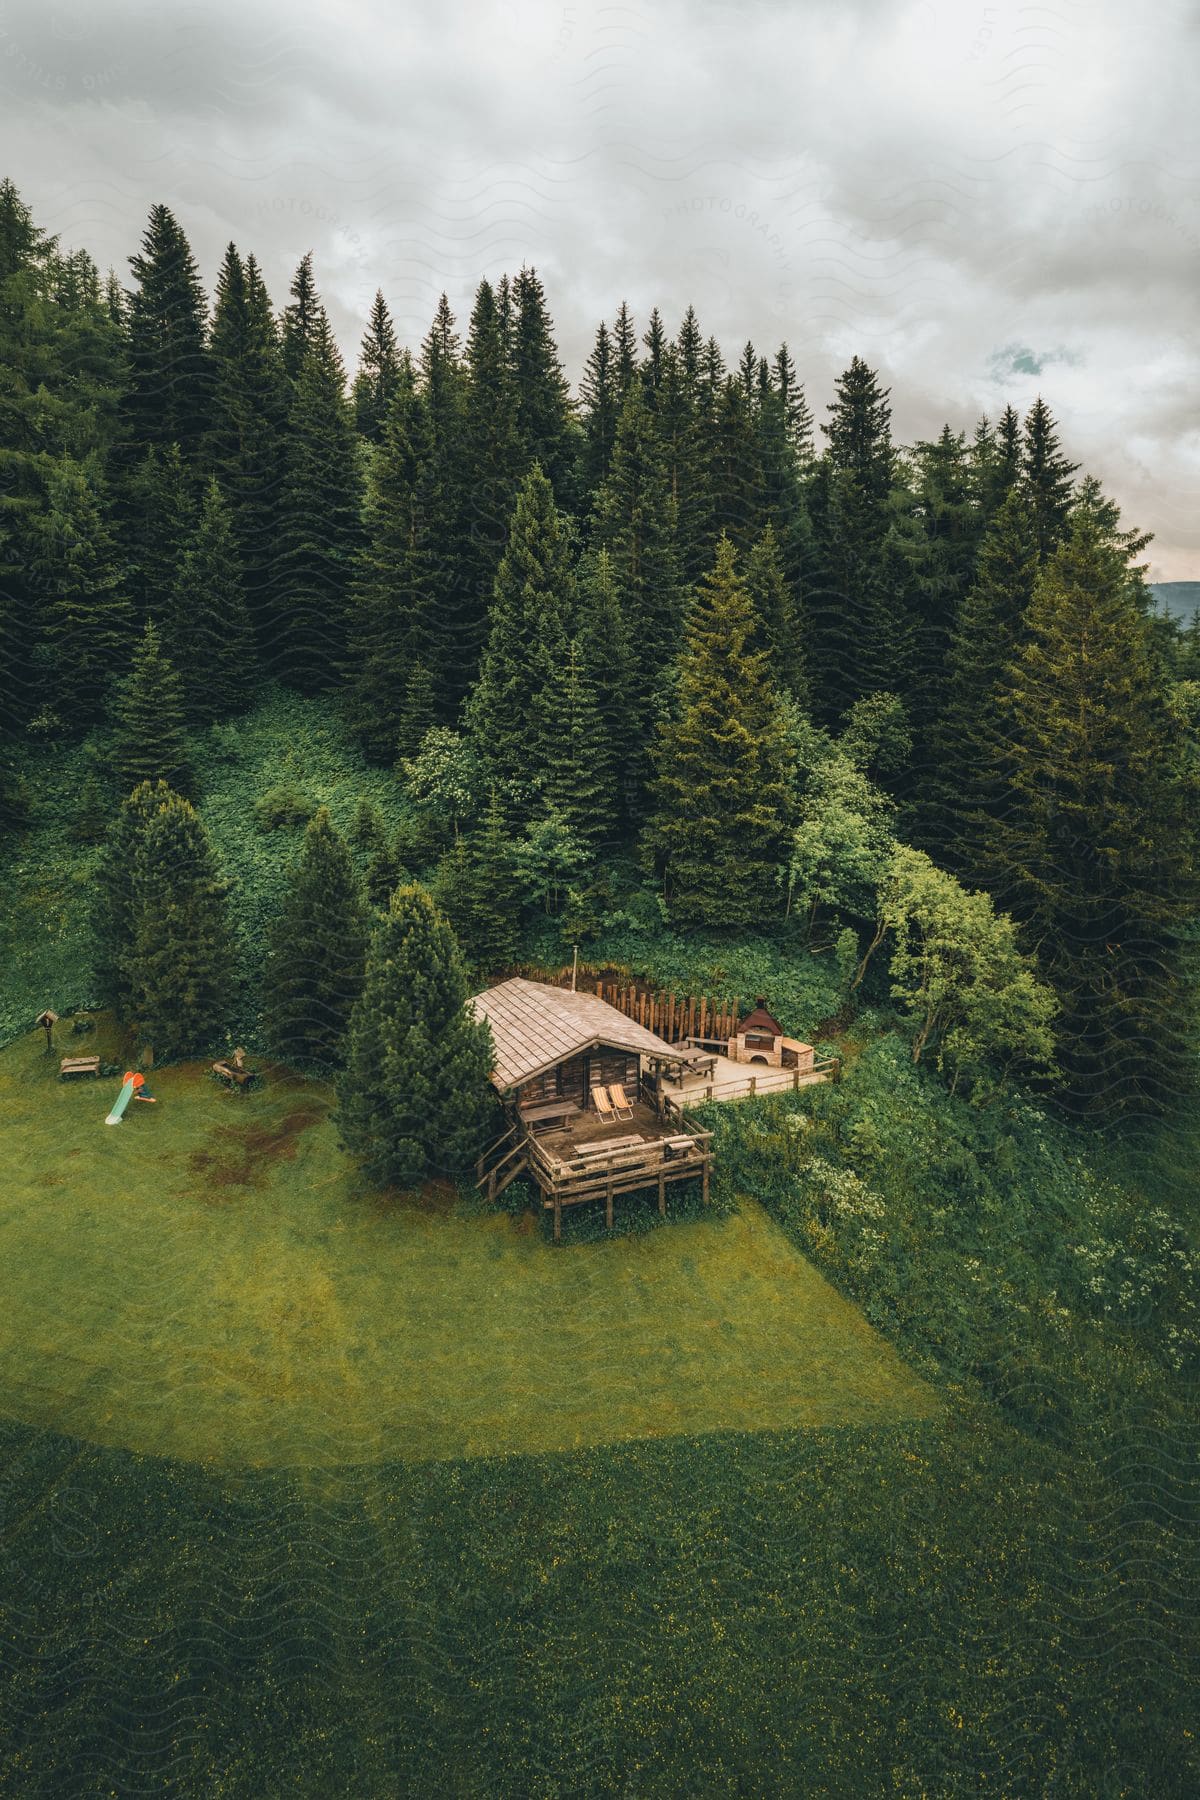 An old wooden cabin between an evergreen forest and a green field.